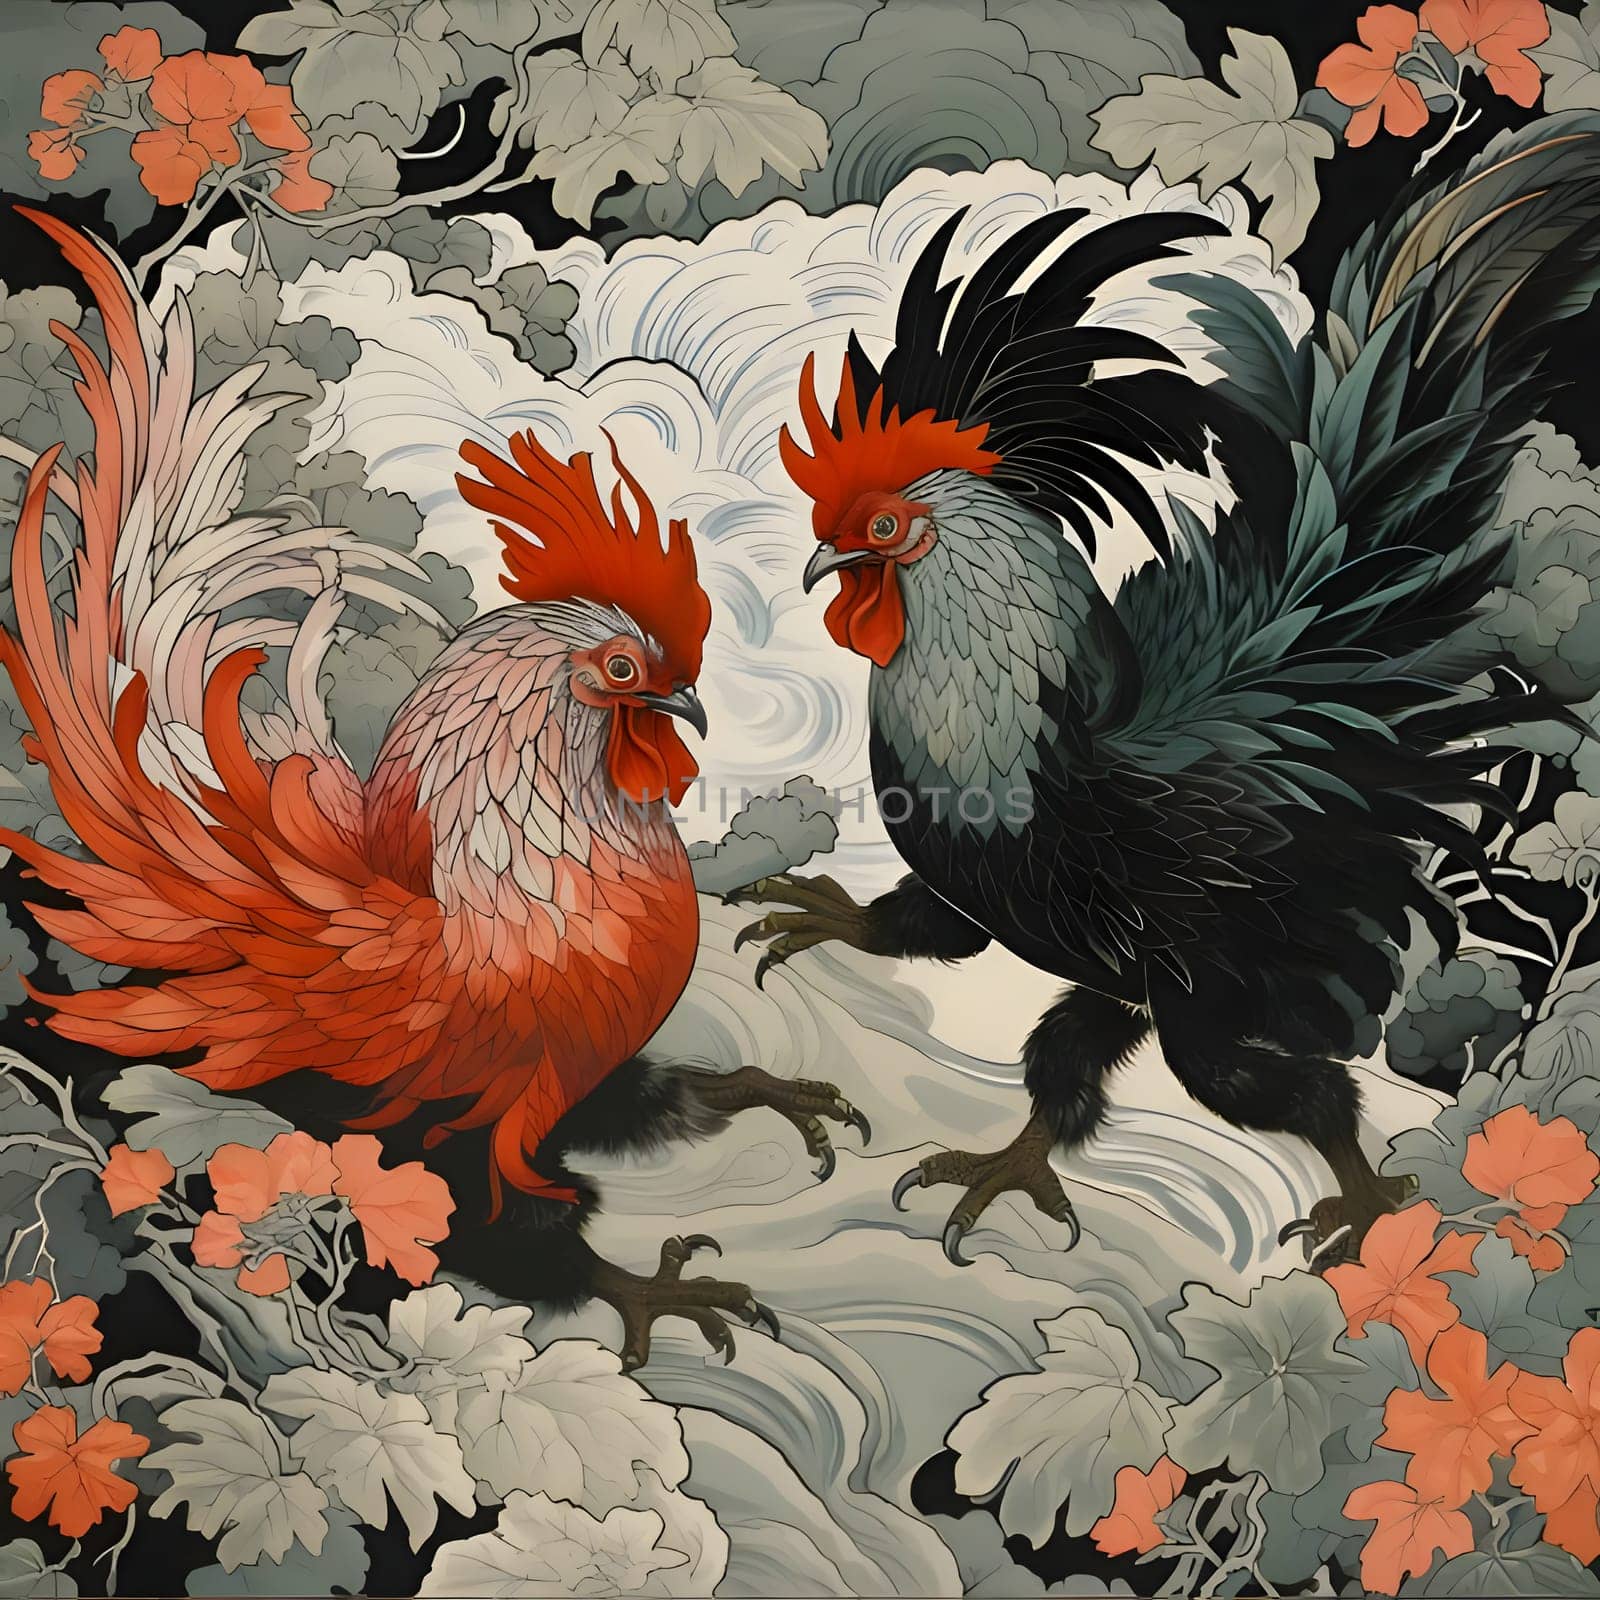 Patterns and banners backgrounds: Illustration of rooster and rooster in a floral background.